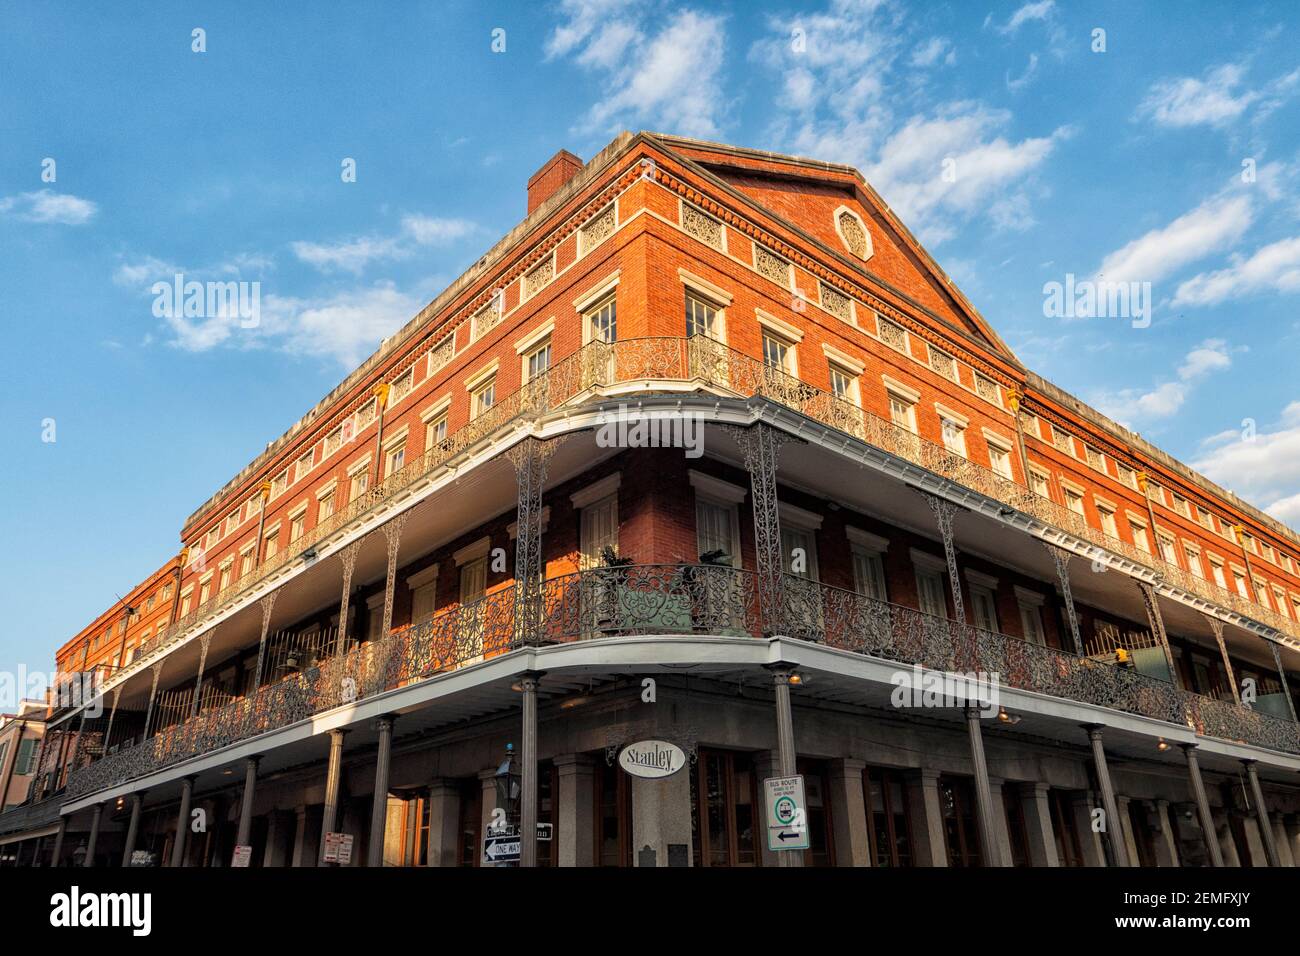 The Stanley hotel in the Old town of New Orleans at Chartres and St Ann street Stock Photo